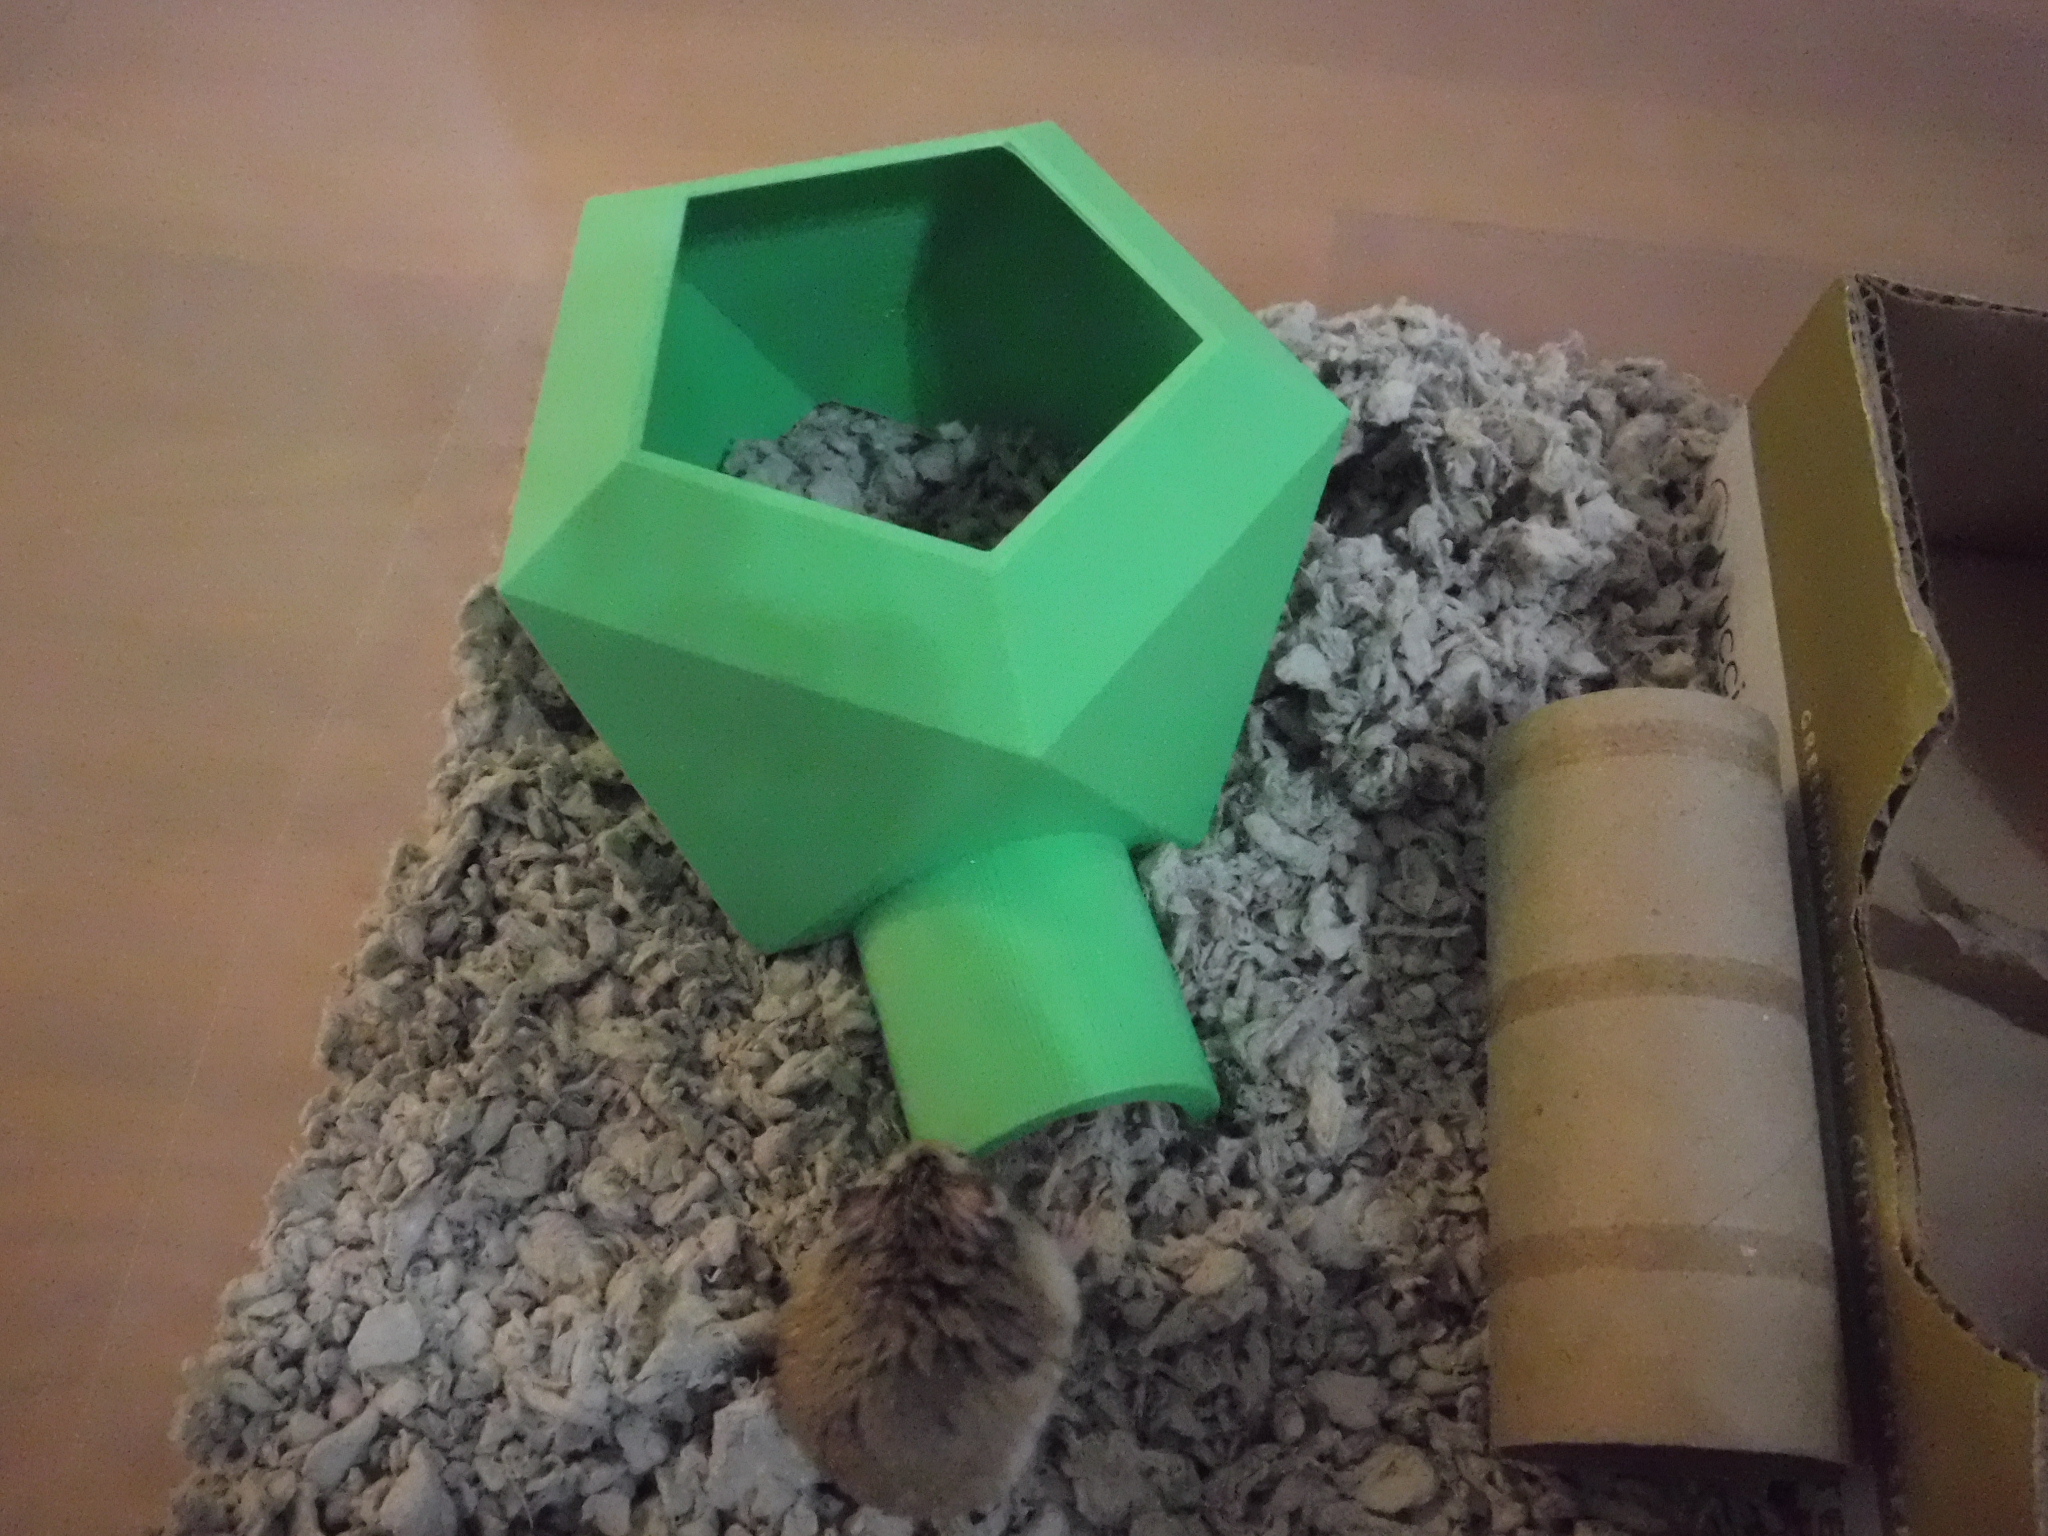 Hamster House—"The Fortress"